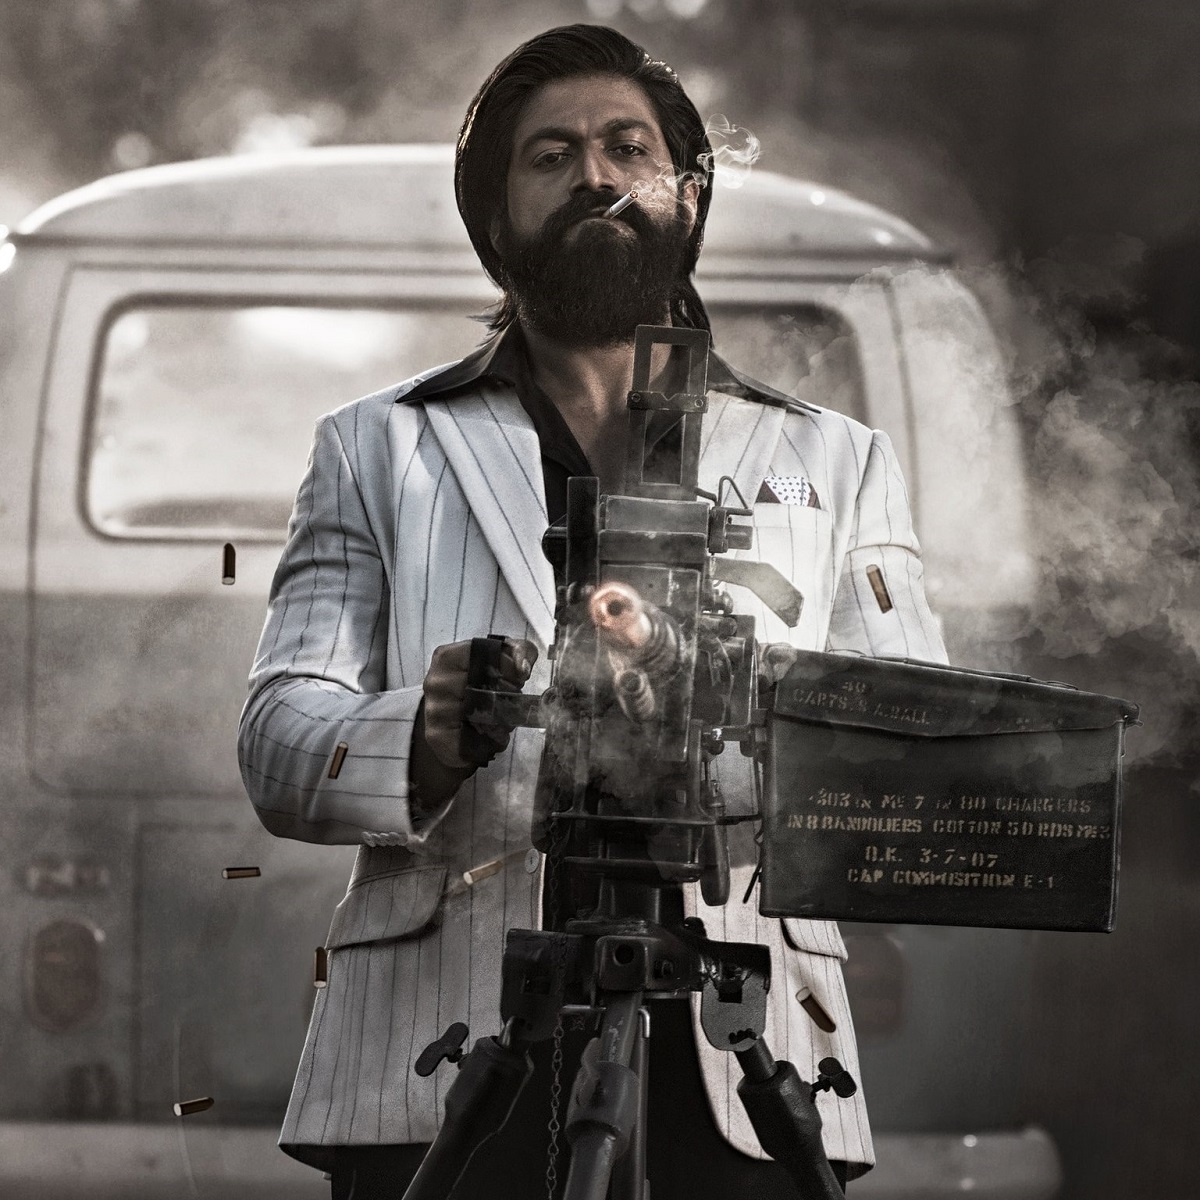 Box Office: KGF Chapter 2 shoots to Rs. 800 crores in India; 2nd fastest ever ahead of RRR